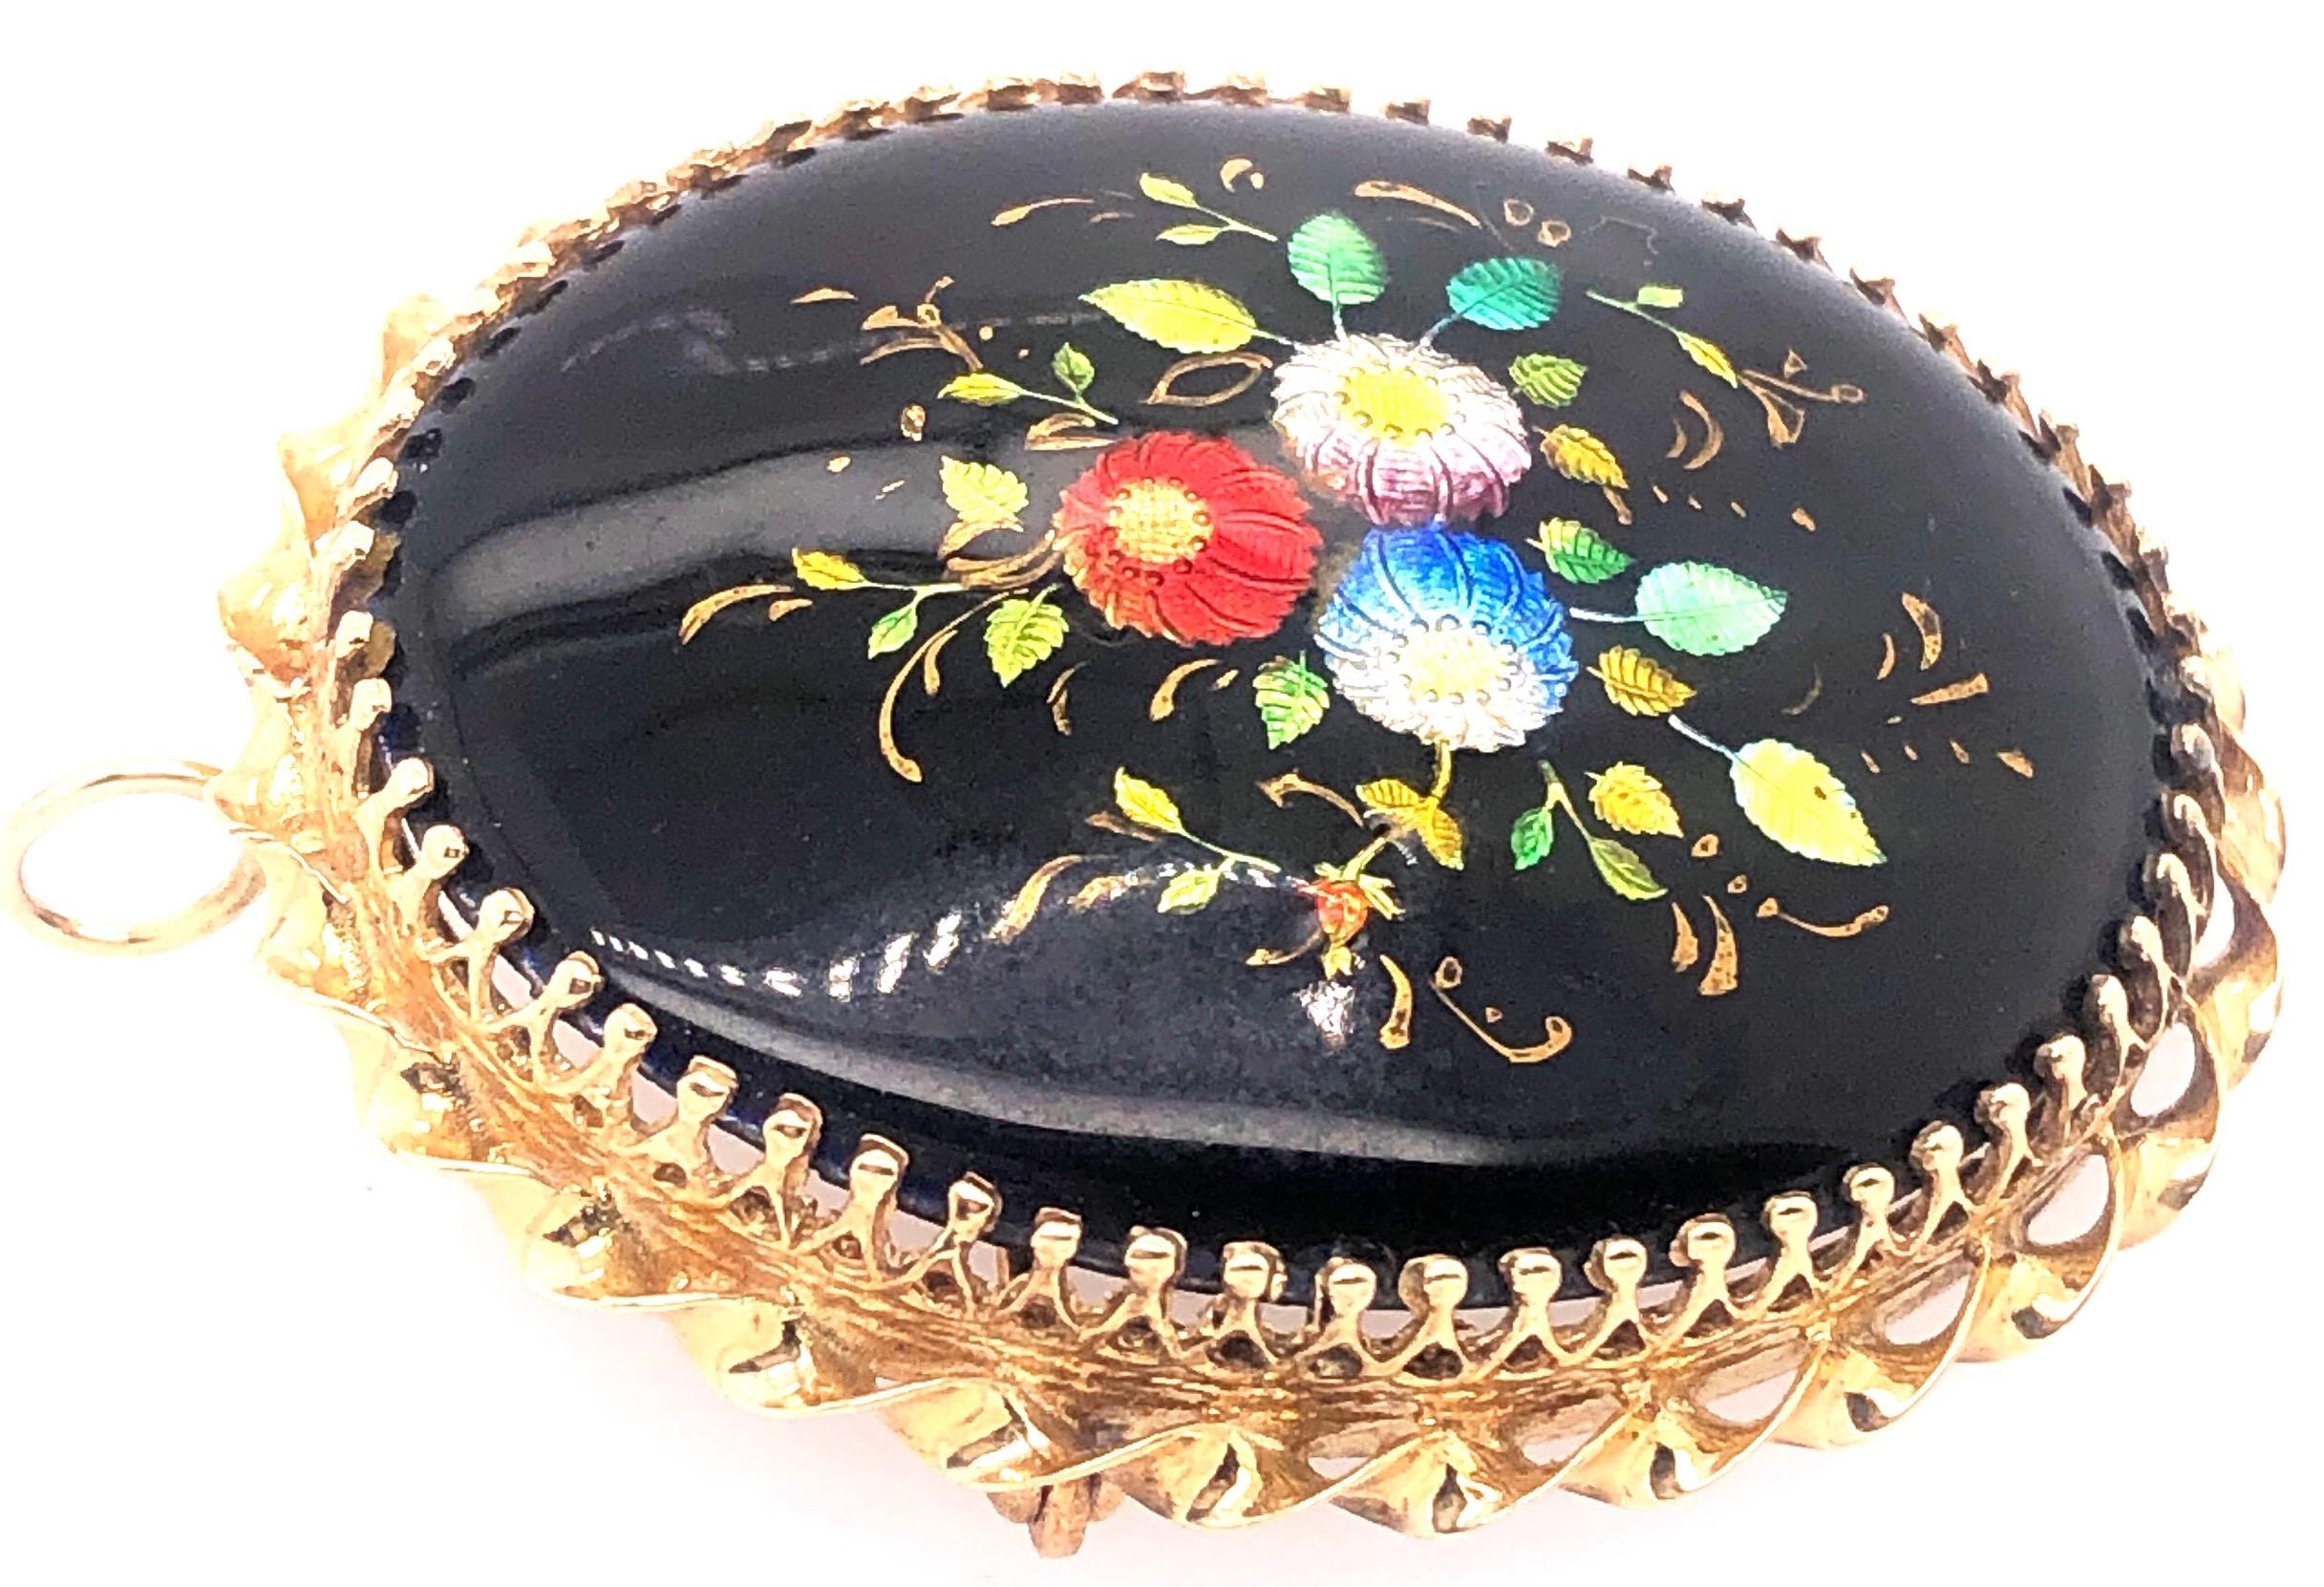 14 Karat Yellow Gold And Oval Enamel Floral Design Brooch / Pendant  France
8.78 grams total weight.